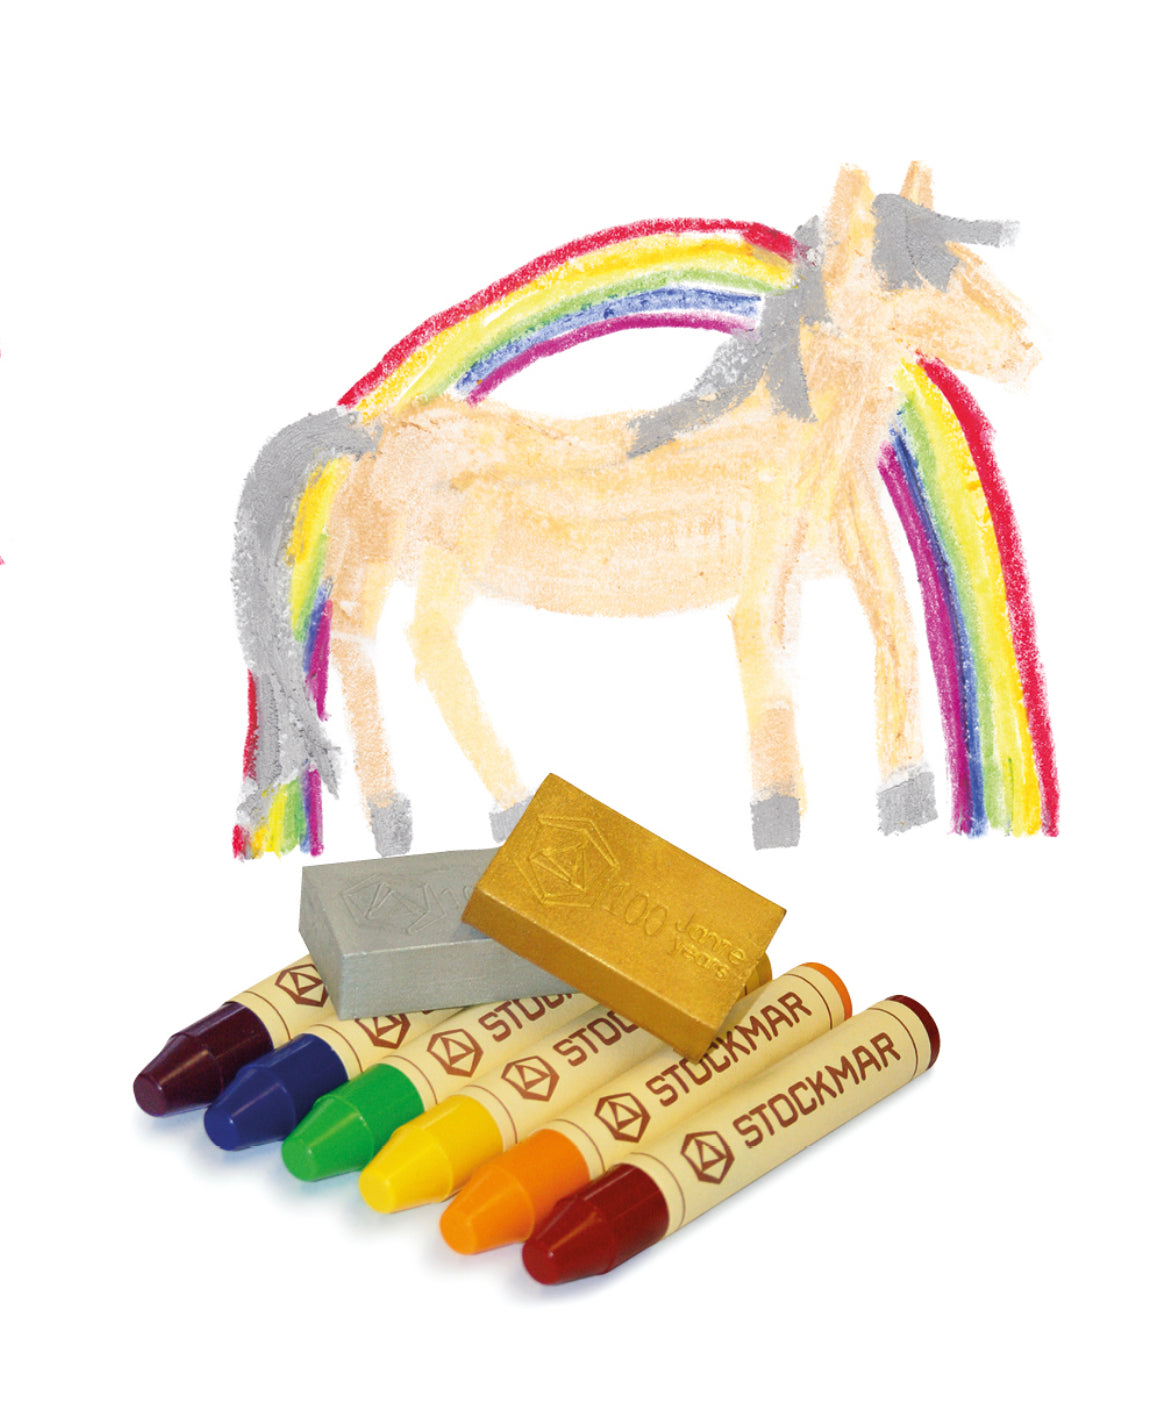 Stockmar Rainbow Edition Stick and Block Crayons - 8 Assorted Wax Crayons - Alder & Alouette